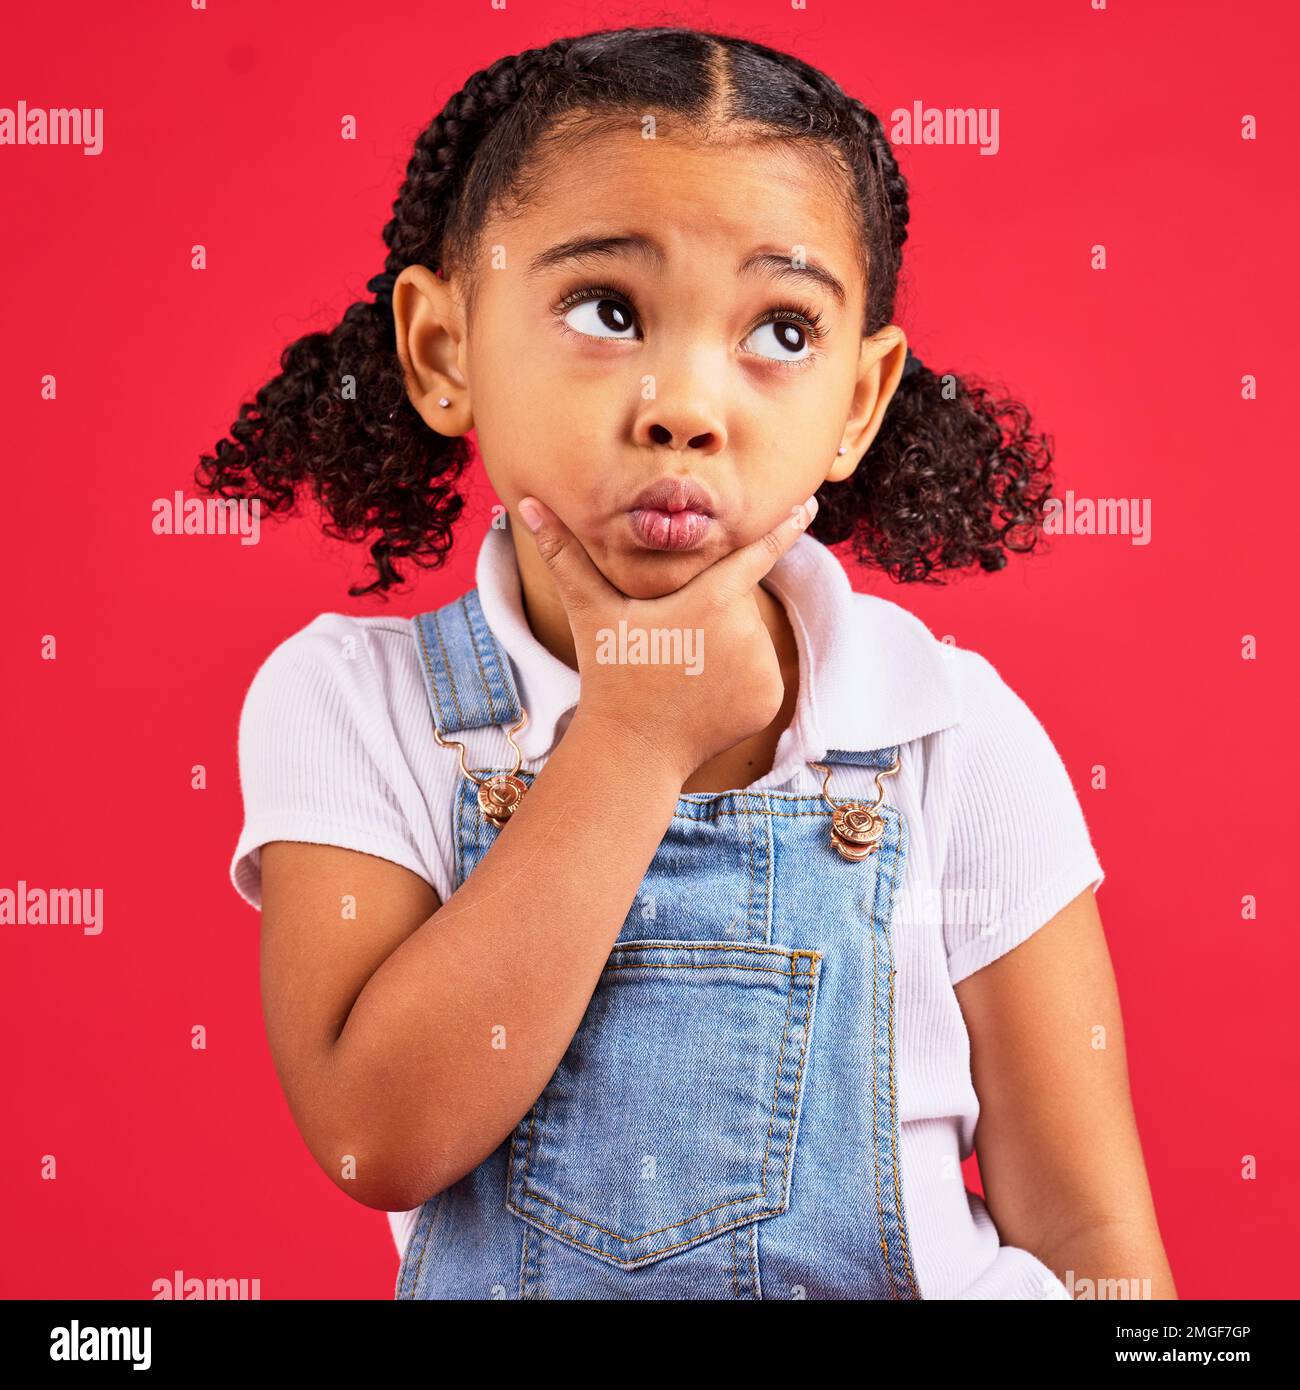 Kid, ideas or thinking face by isolated red background in games innovation, question or planning vision. Little girl, expression or curious finger on Stock Photo